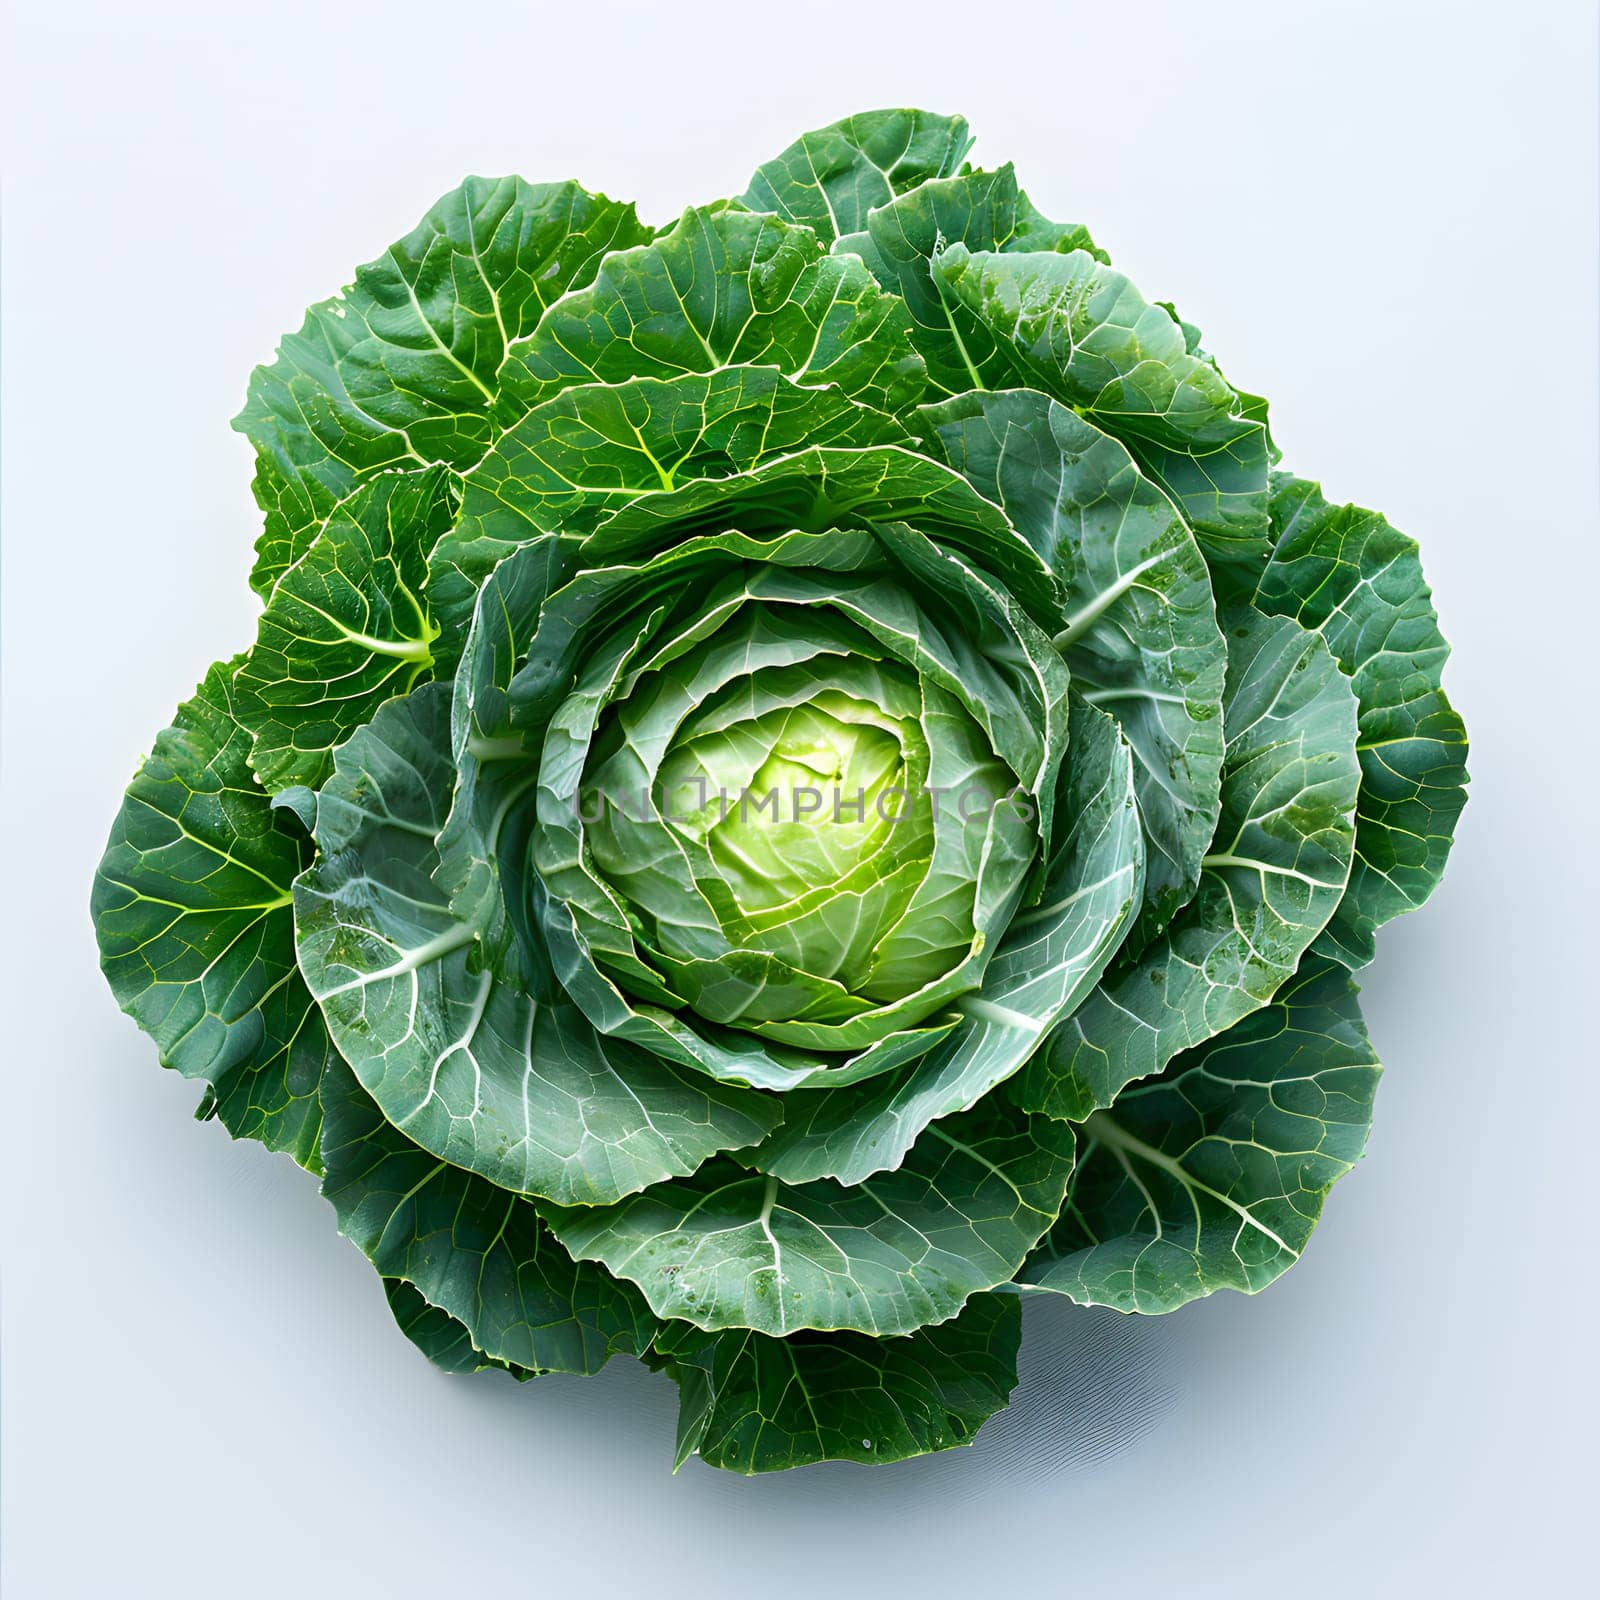 A closeup shot of a vibrant green cabbage, a leaf vegetable, on a crisp white background. The cabbage looks fresh and ready to be used as food ingredient